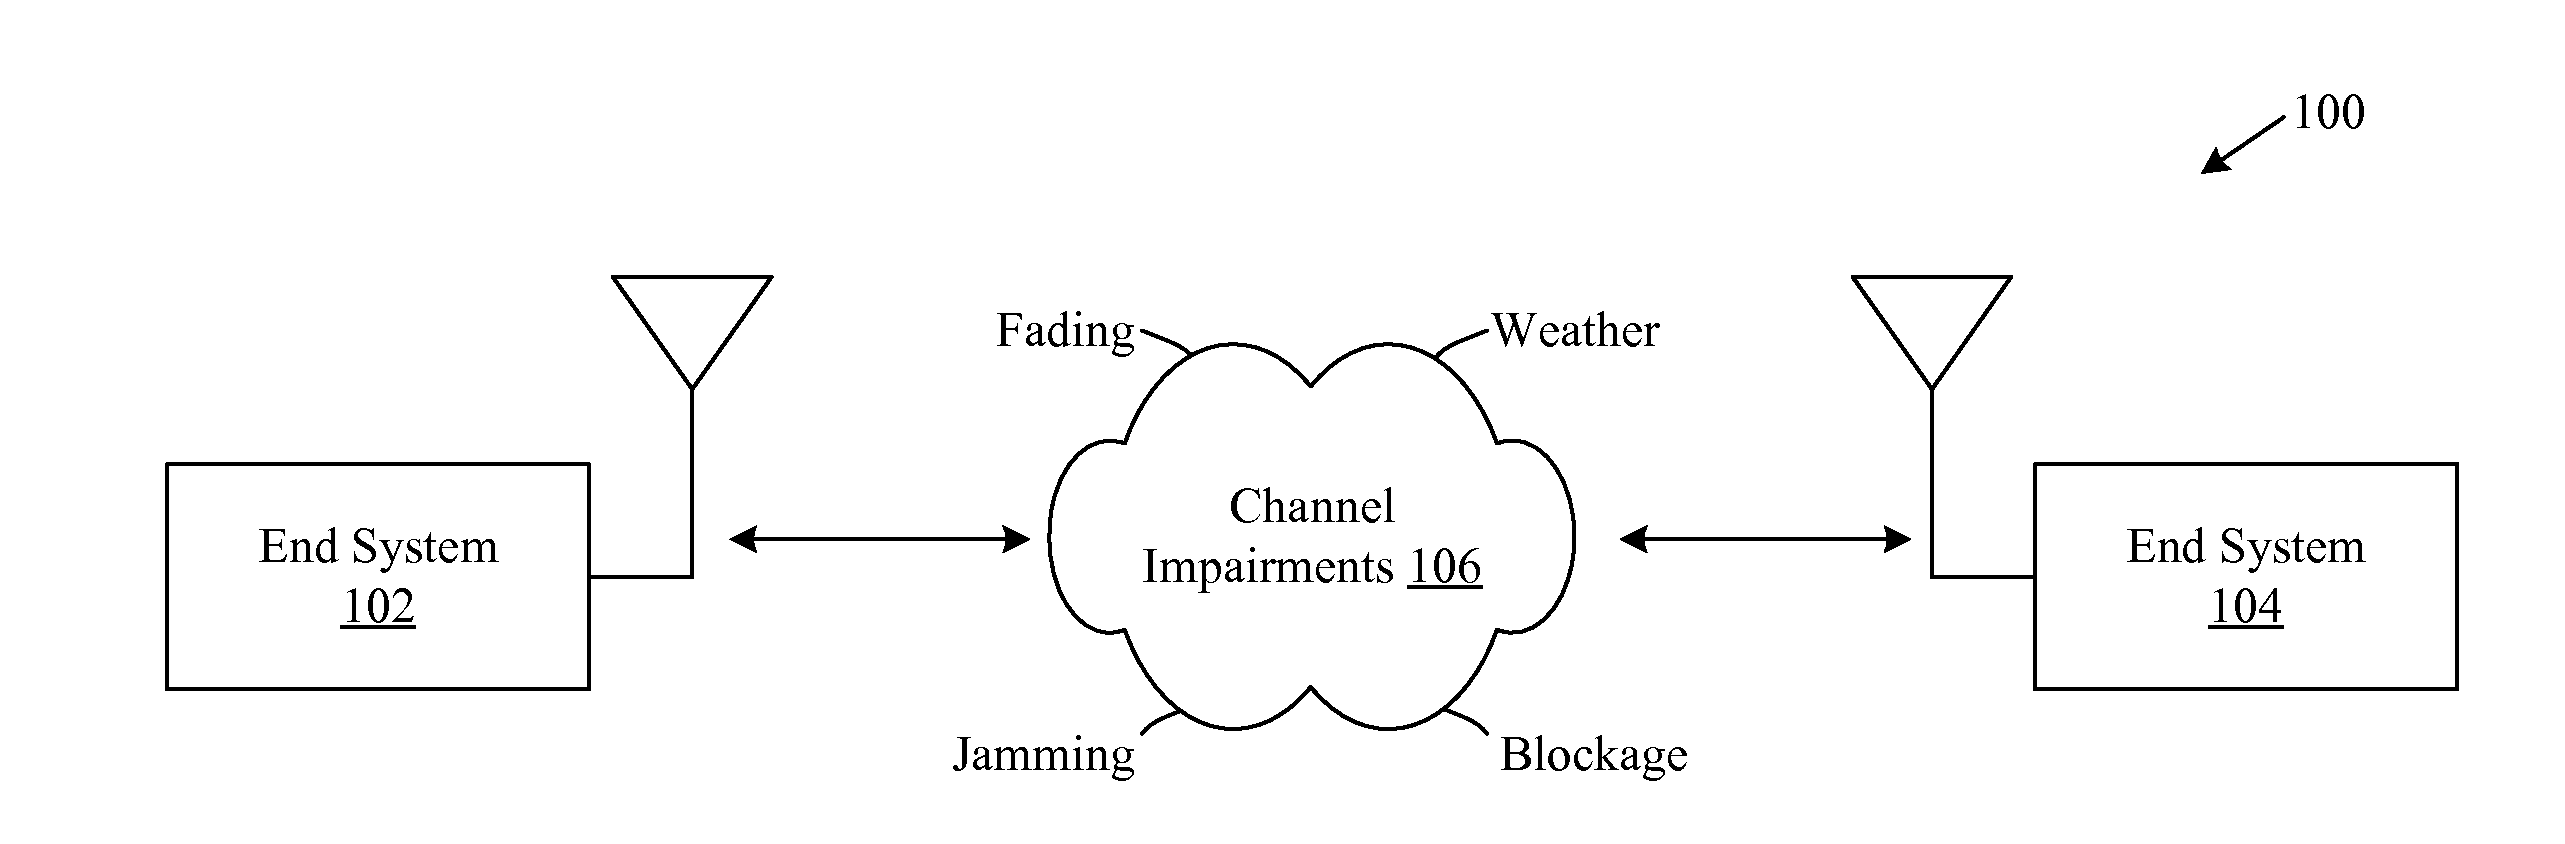 Systems and methods for concurrently emulating multiple channel impairments